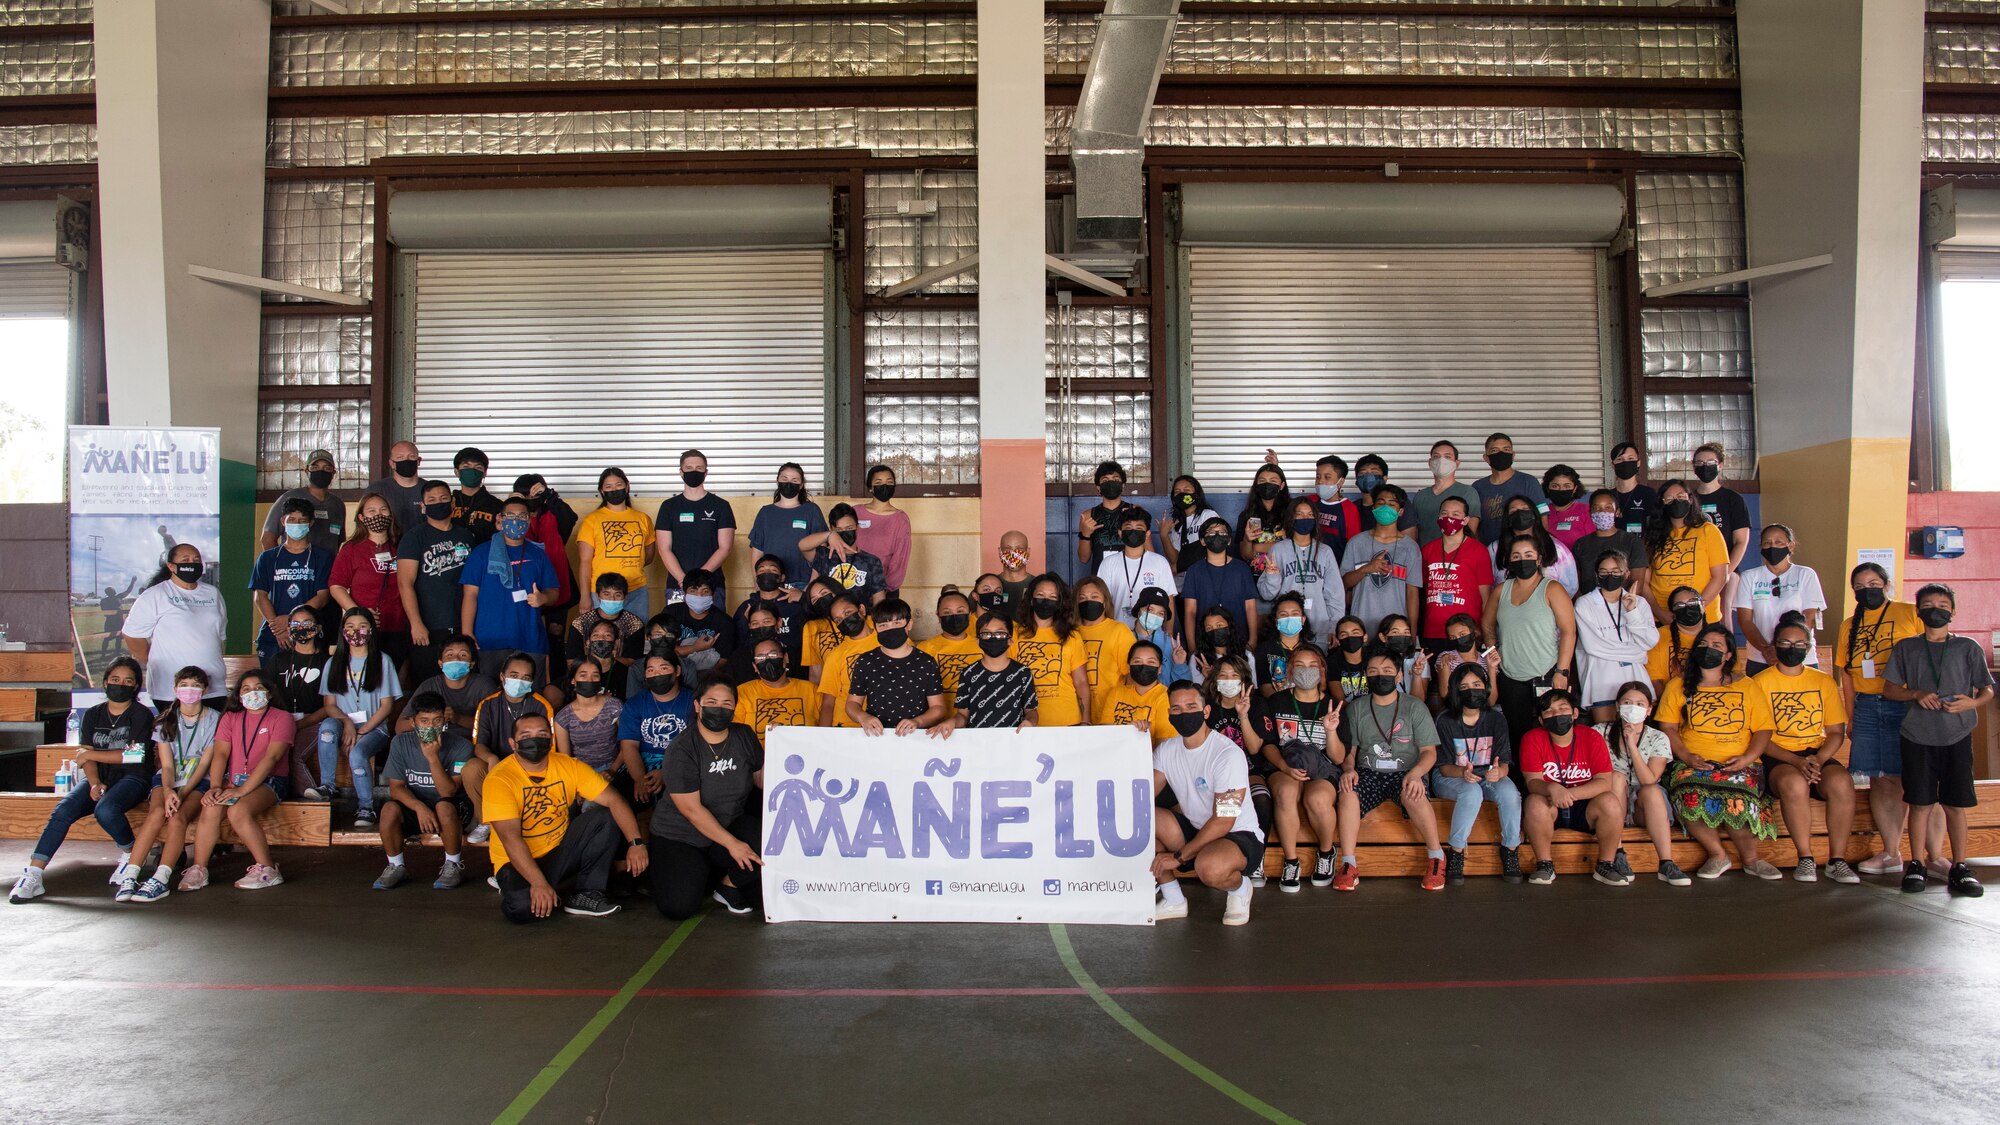 U.S. Air Force Airmen from the 36th Wing, Wing Staff Agency gather with Mañe'lu leaders as well as middle and high school students for a group photo at Astumbo Middle School in Dededo, Guam, July 19, 2021. The Airmen volunteered through their Sister Village Sister Squadron program, which partnered with Mañe'lu, an organization with a mission to empower and educate children and families facing adversity to change their lives for the better. (U.S. Air Force photo by Senior Airman Aubree Owens)